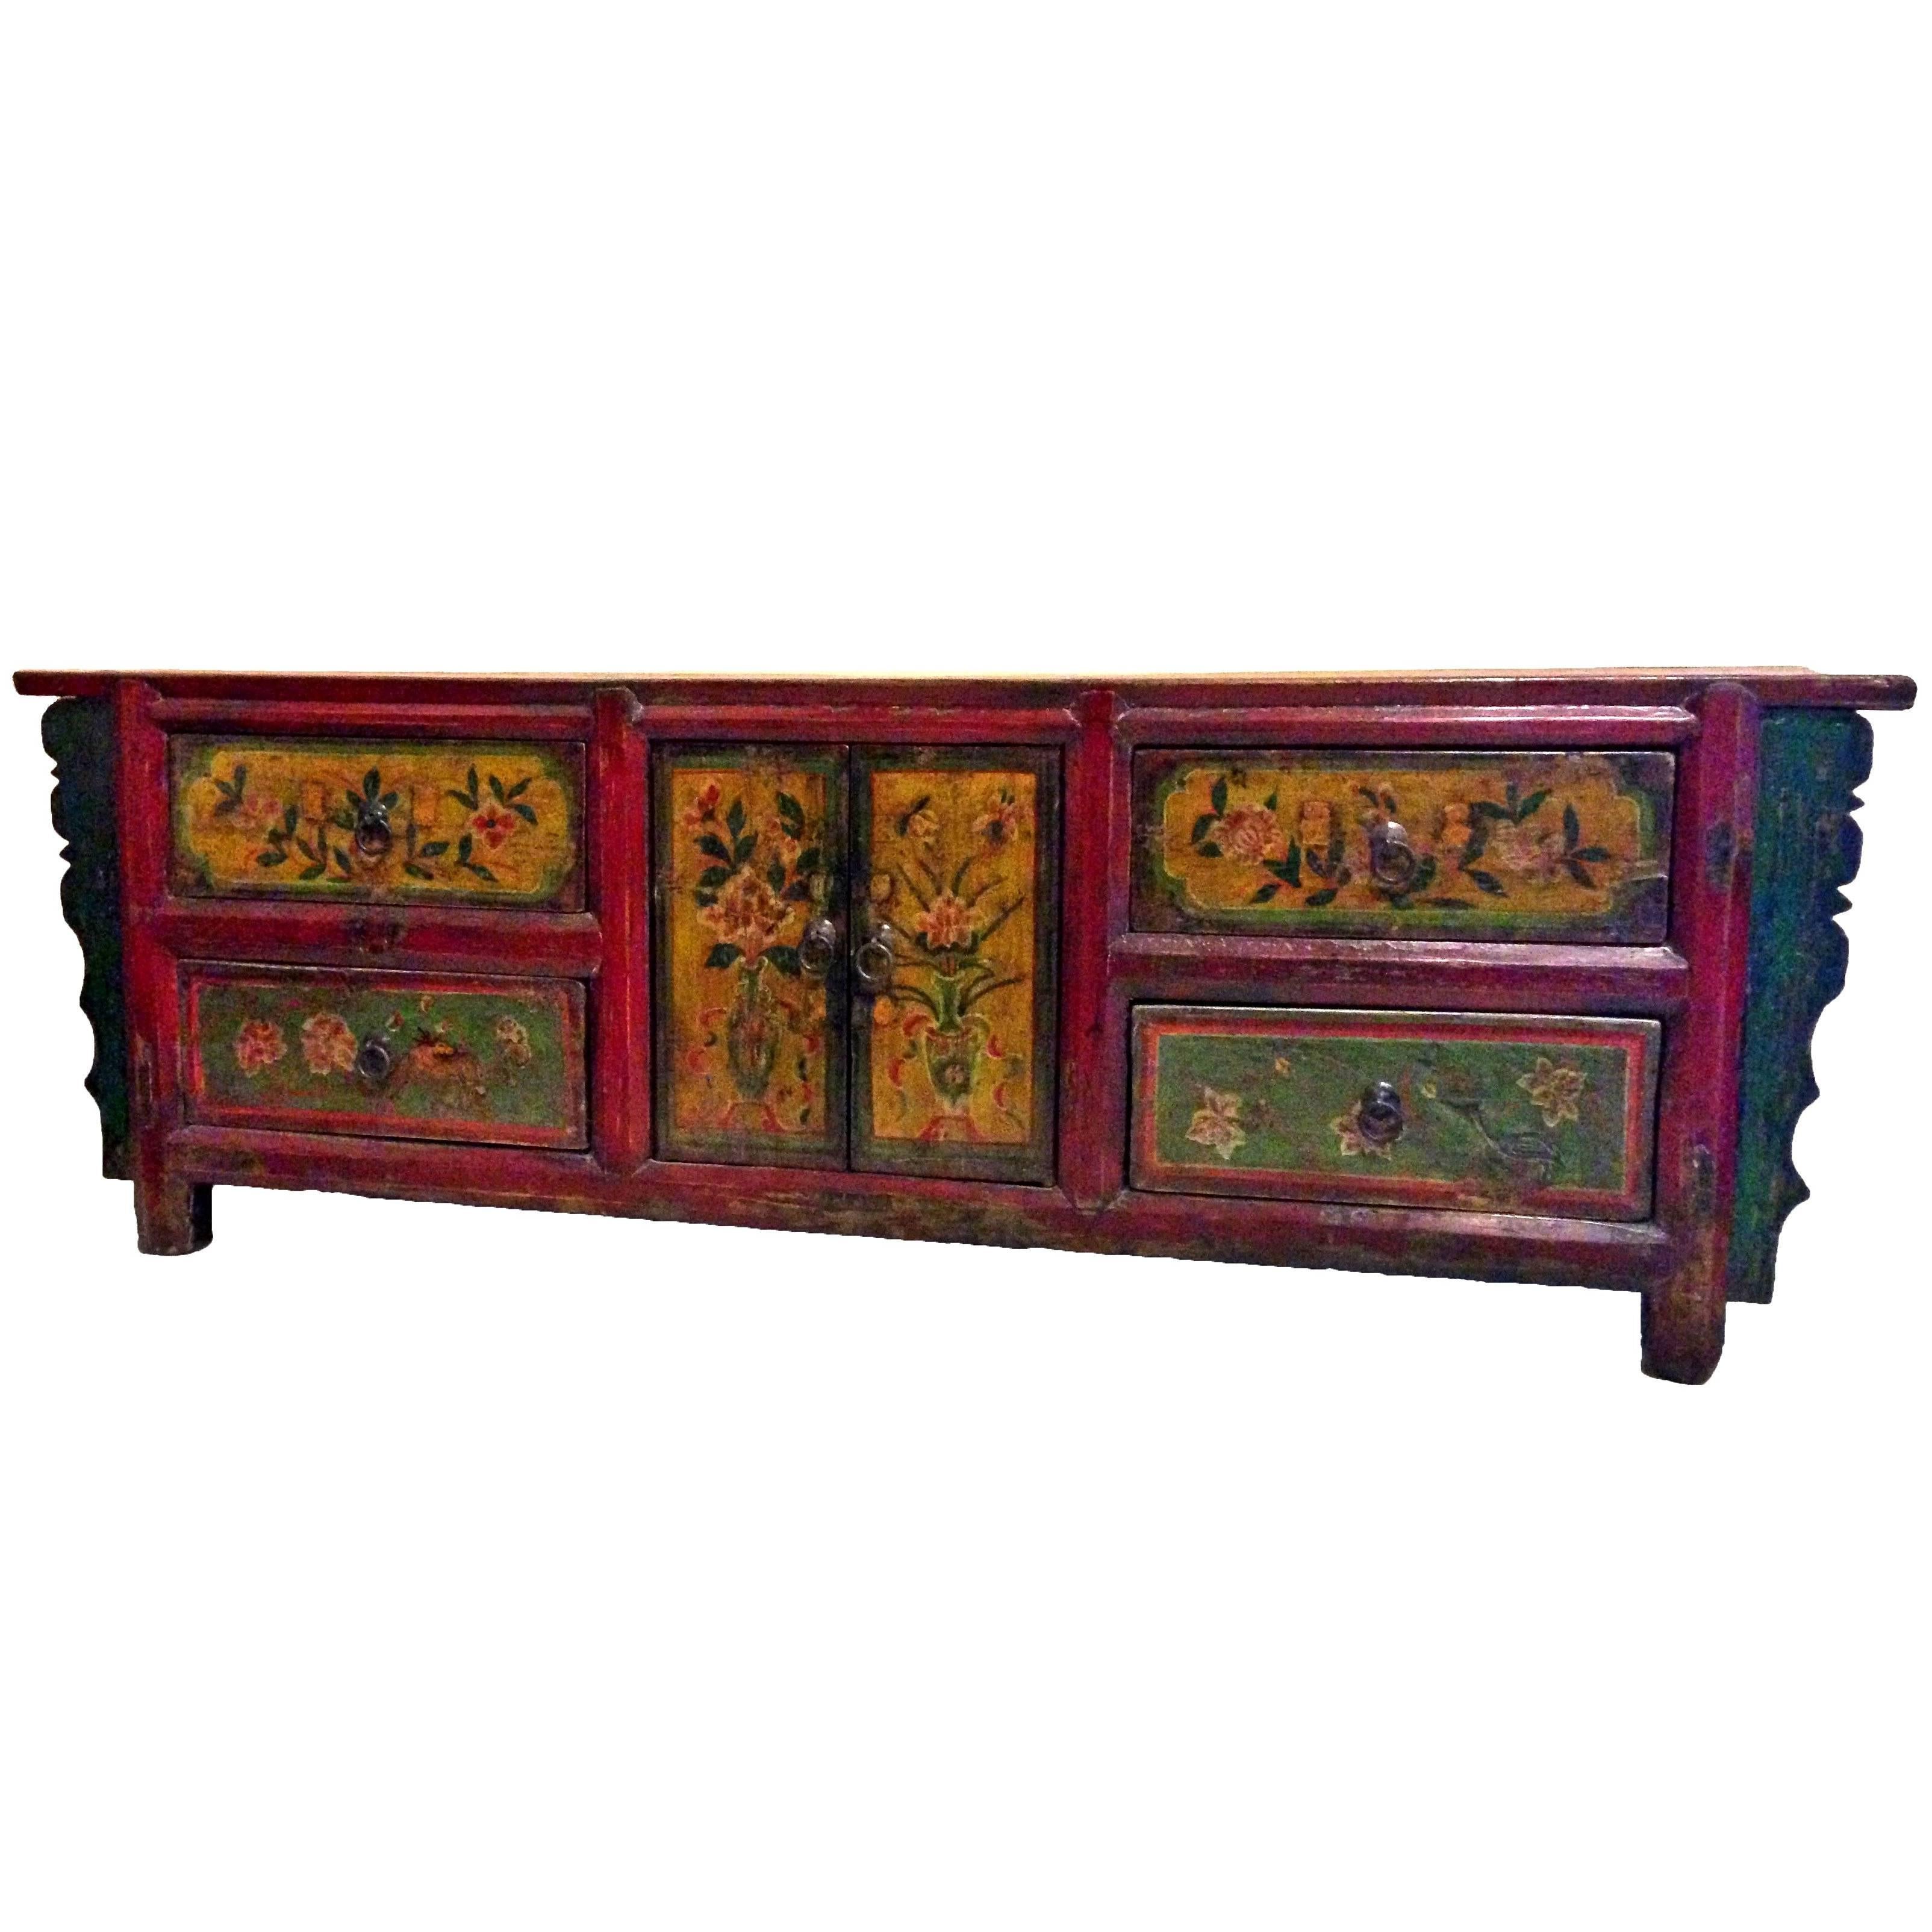 Antique Tribal Chest, Painted with Cranes and Deer